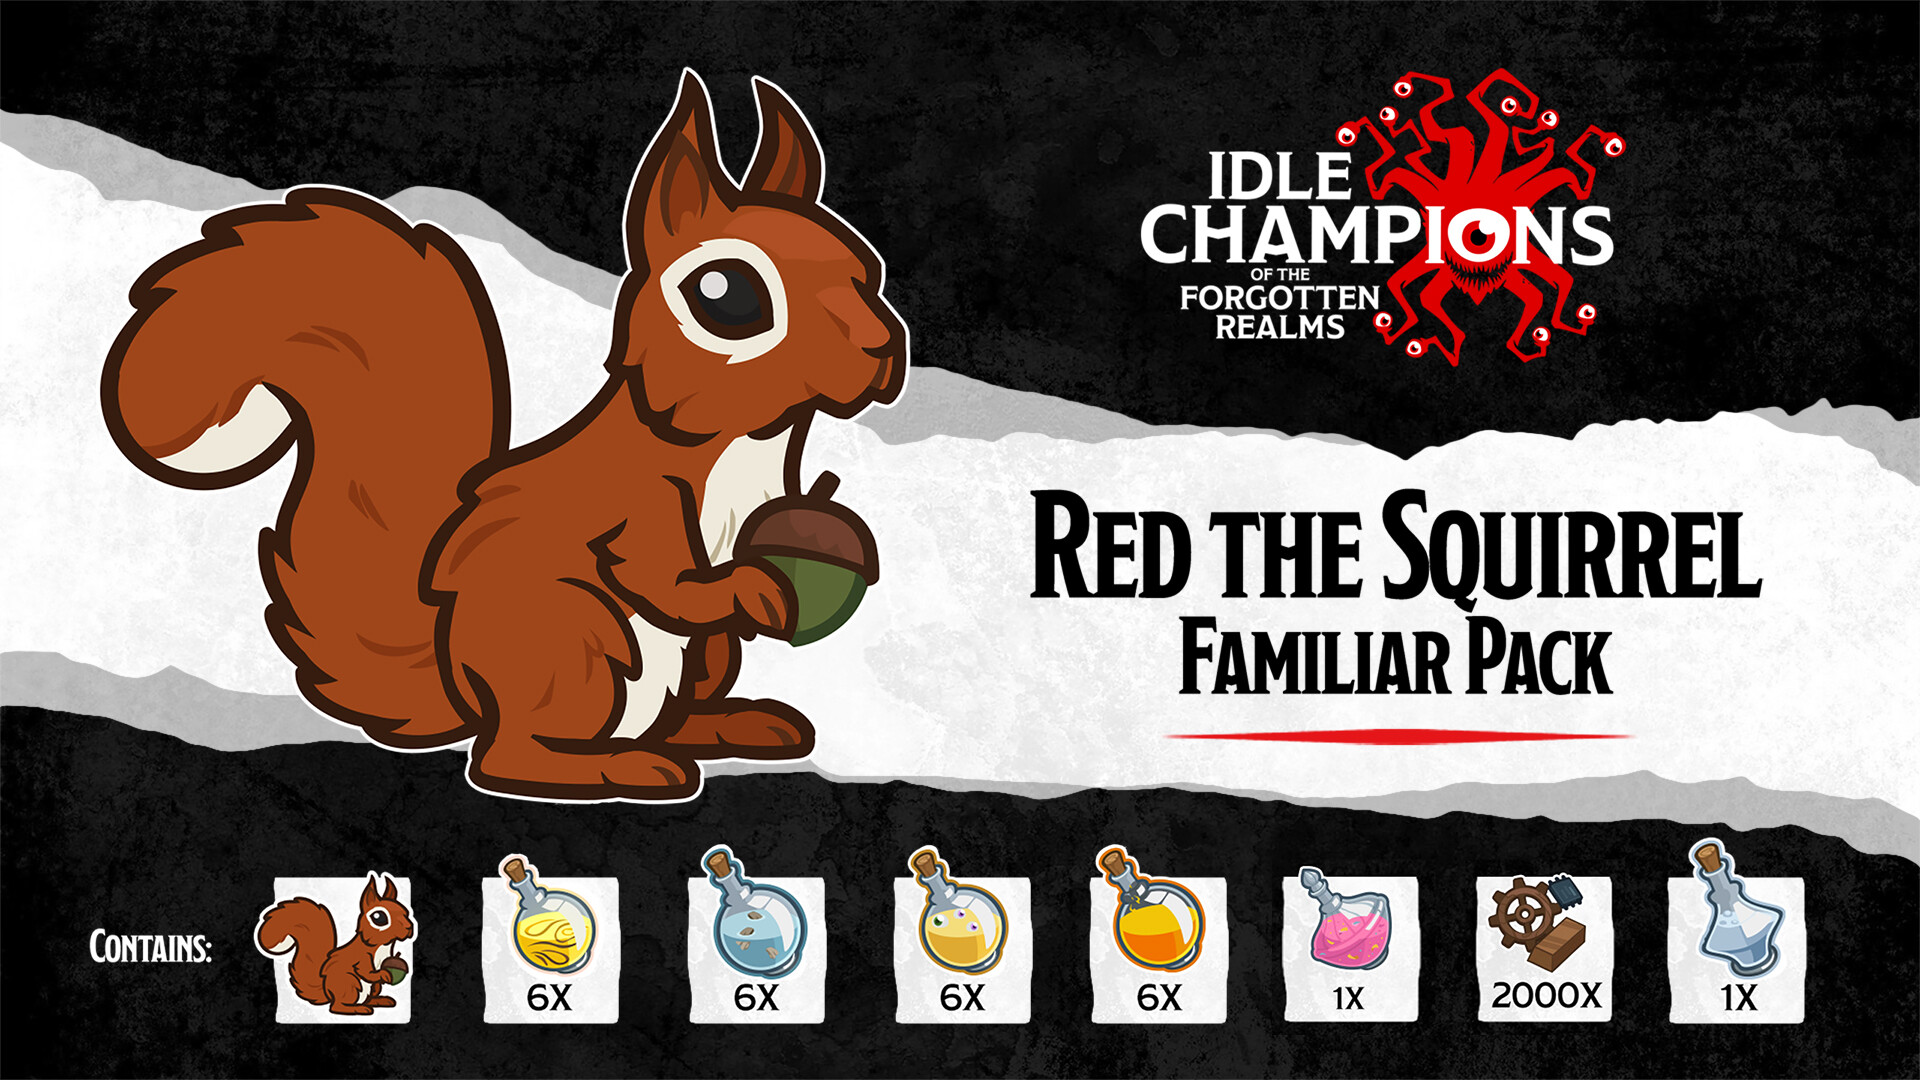 Idle Champions - Red the Squirrel Familiar Pack Featured Screenshot #1